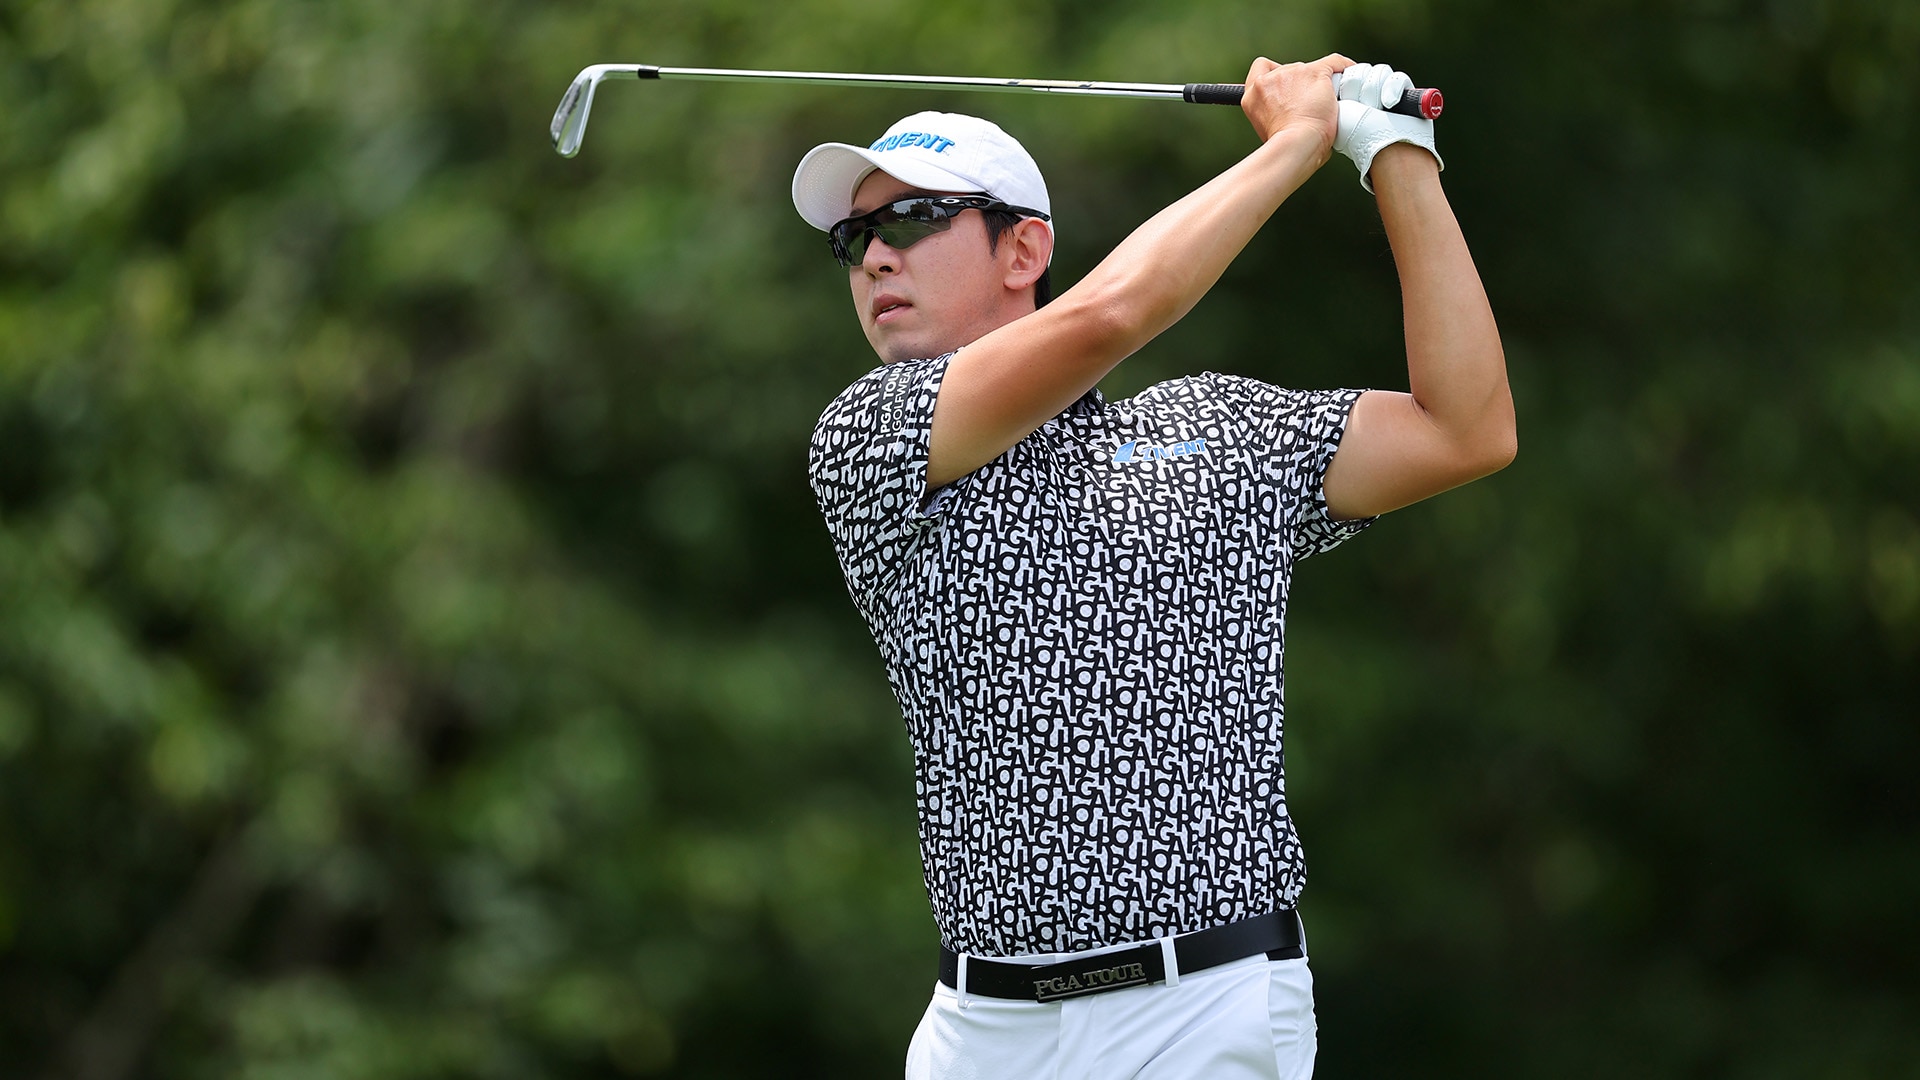 Seung-yul Noh makes trio of eagles to lead Barracuda Championship